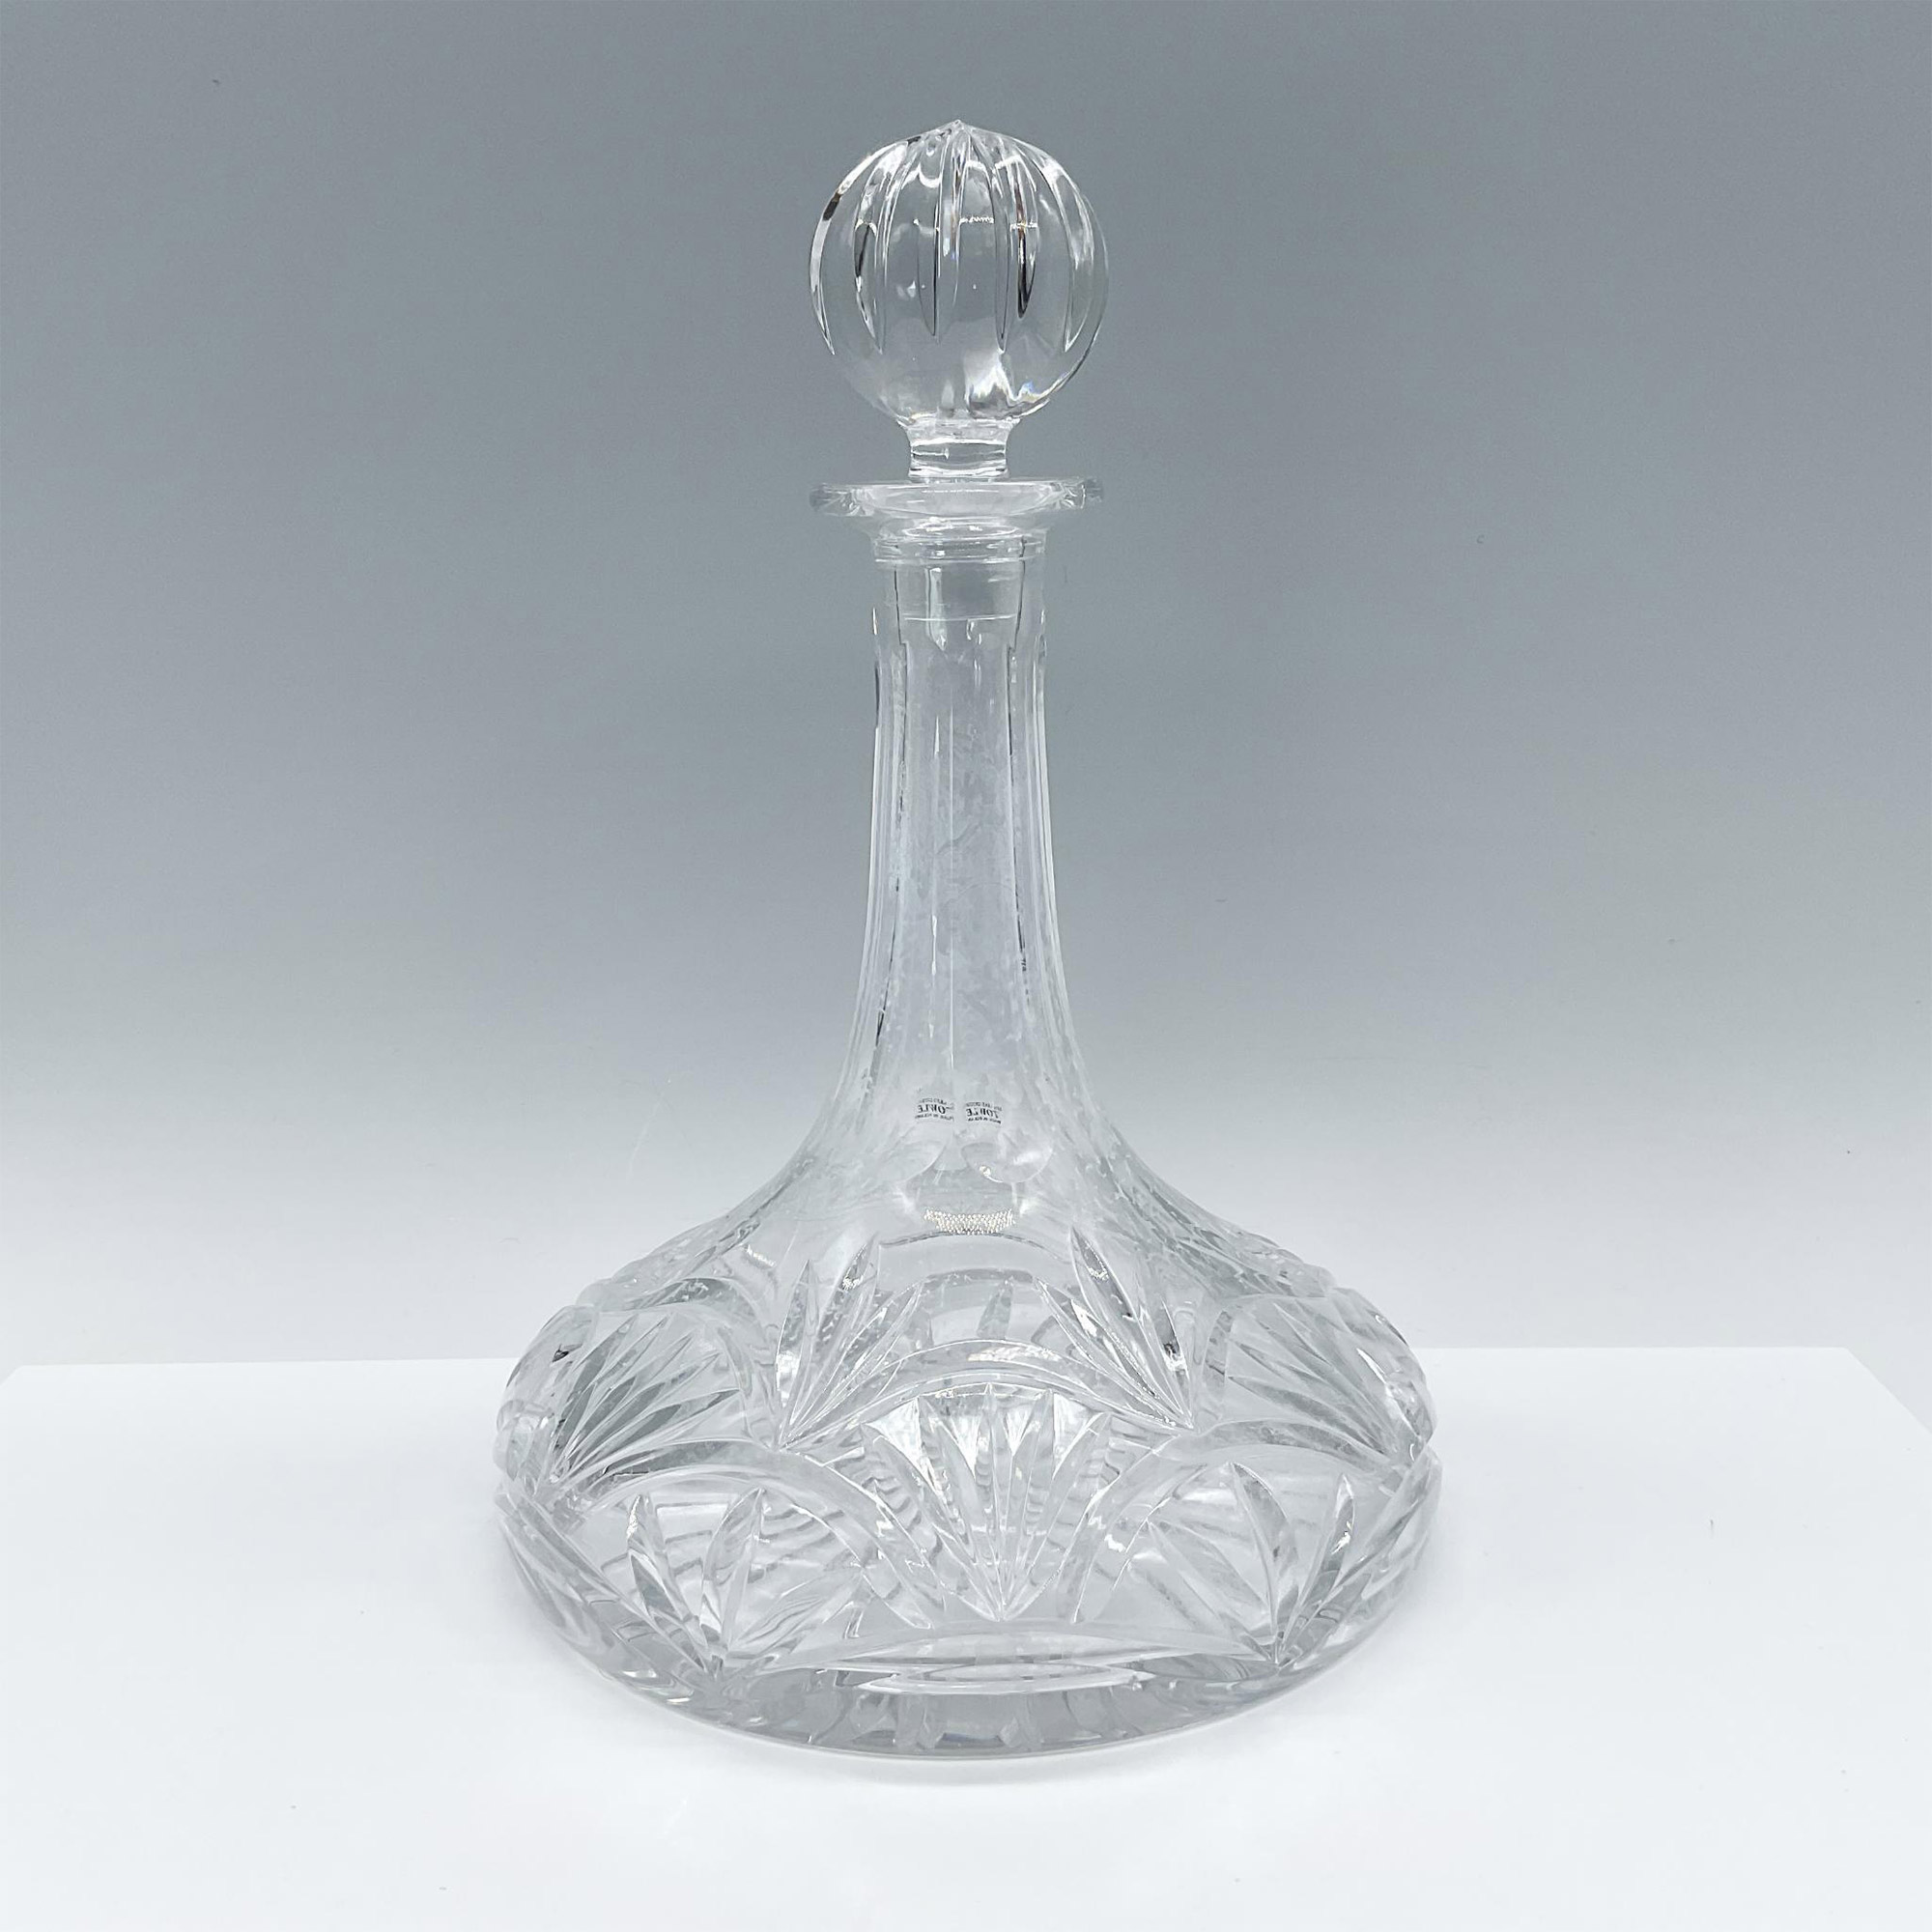 Towle Crystal Ship's Decanter - Image 2 of 3